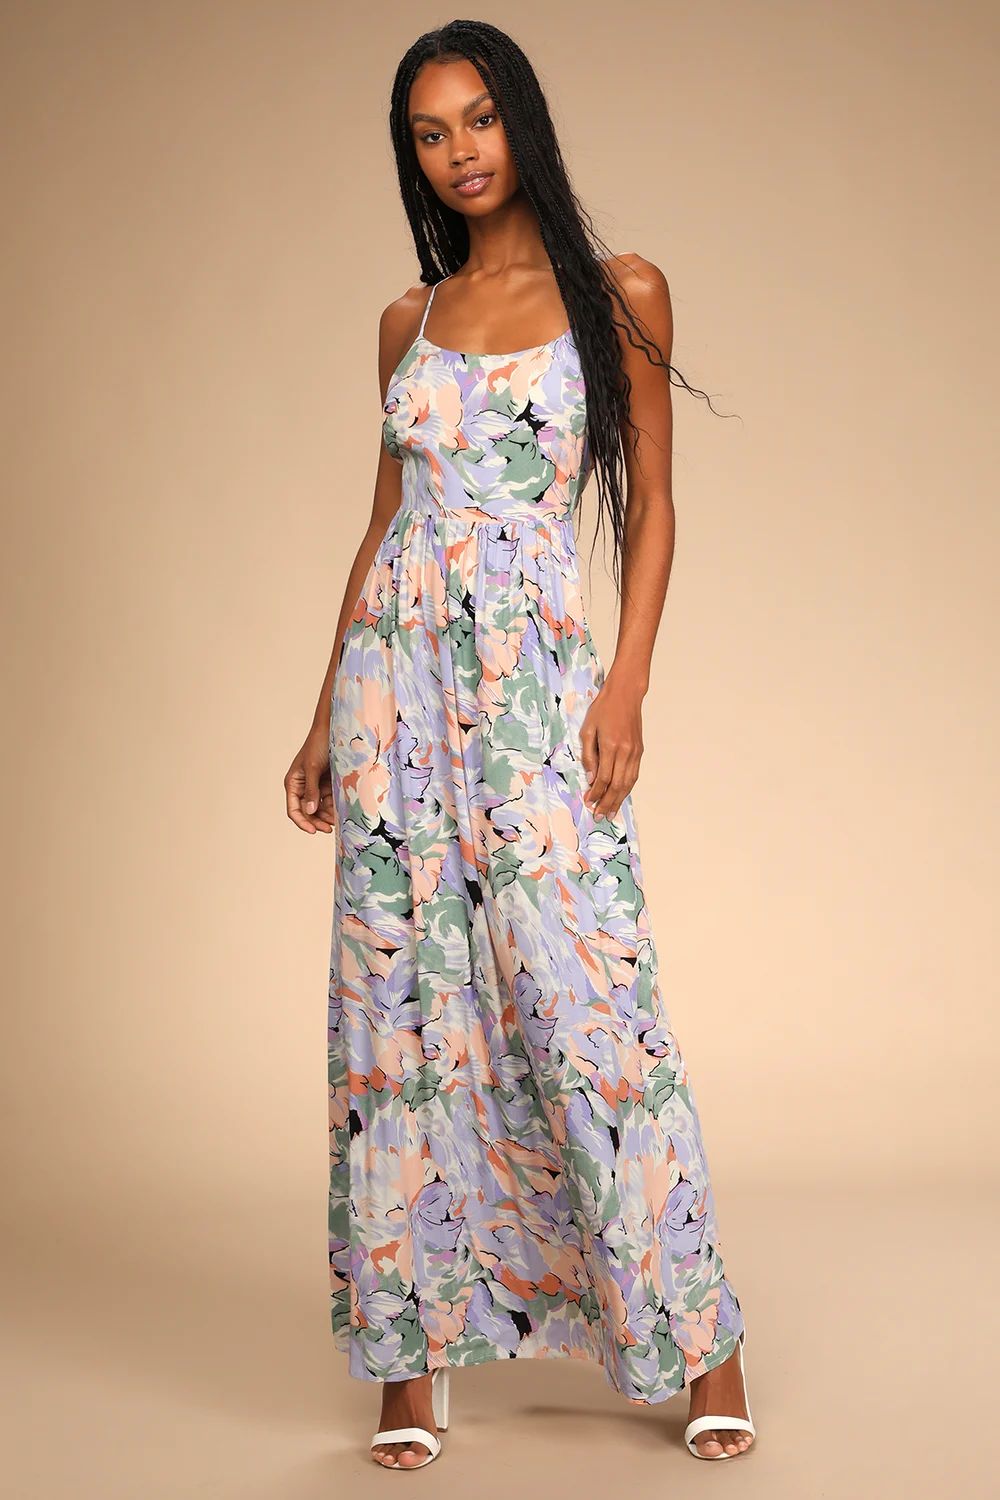 Paint a Picture Ivory Multi Floral Print Sleeveless Maxi Dress | Lulus (US)